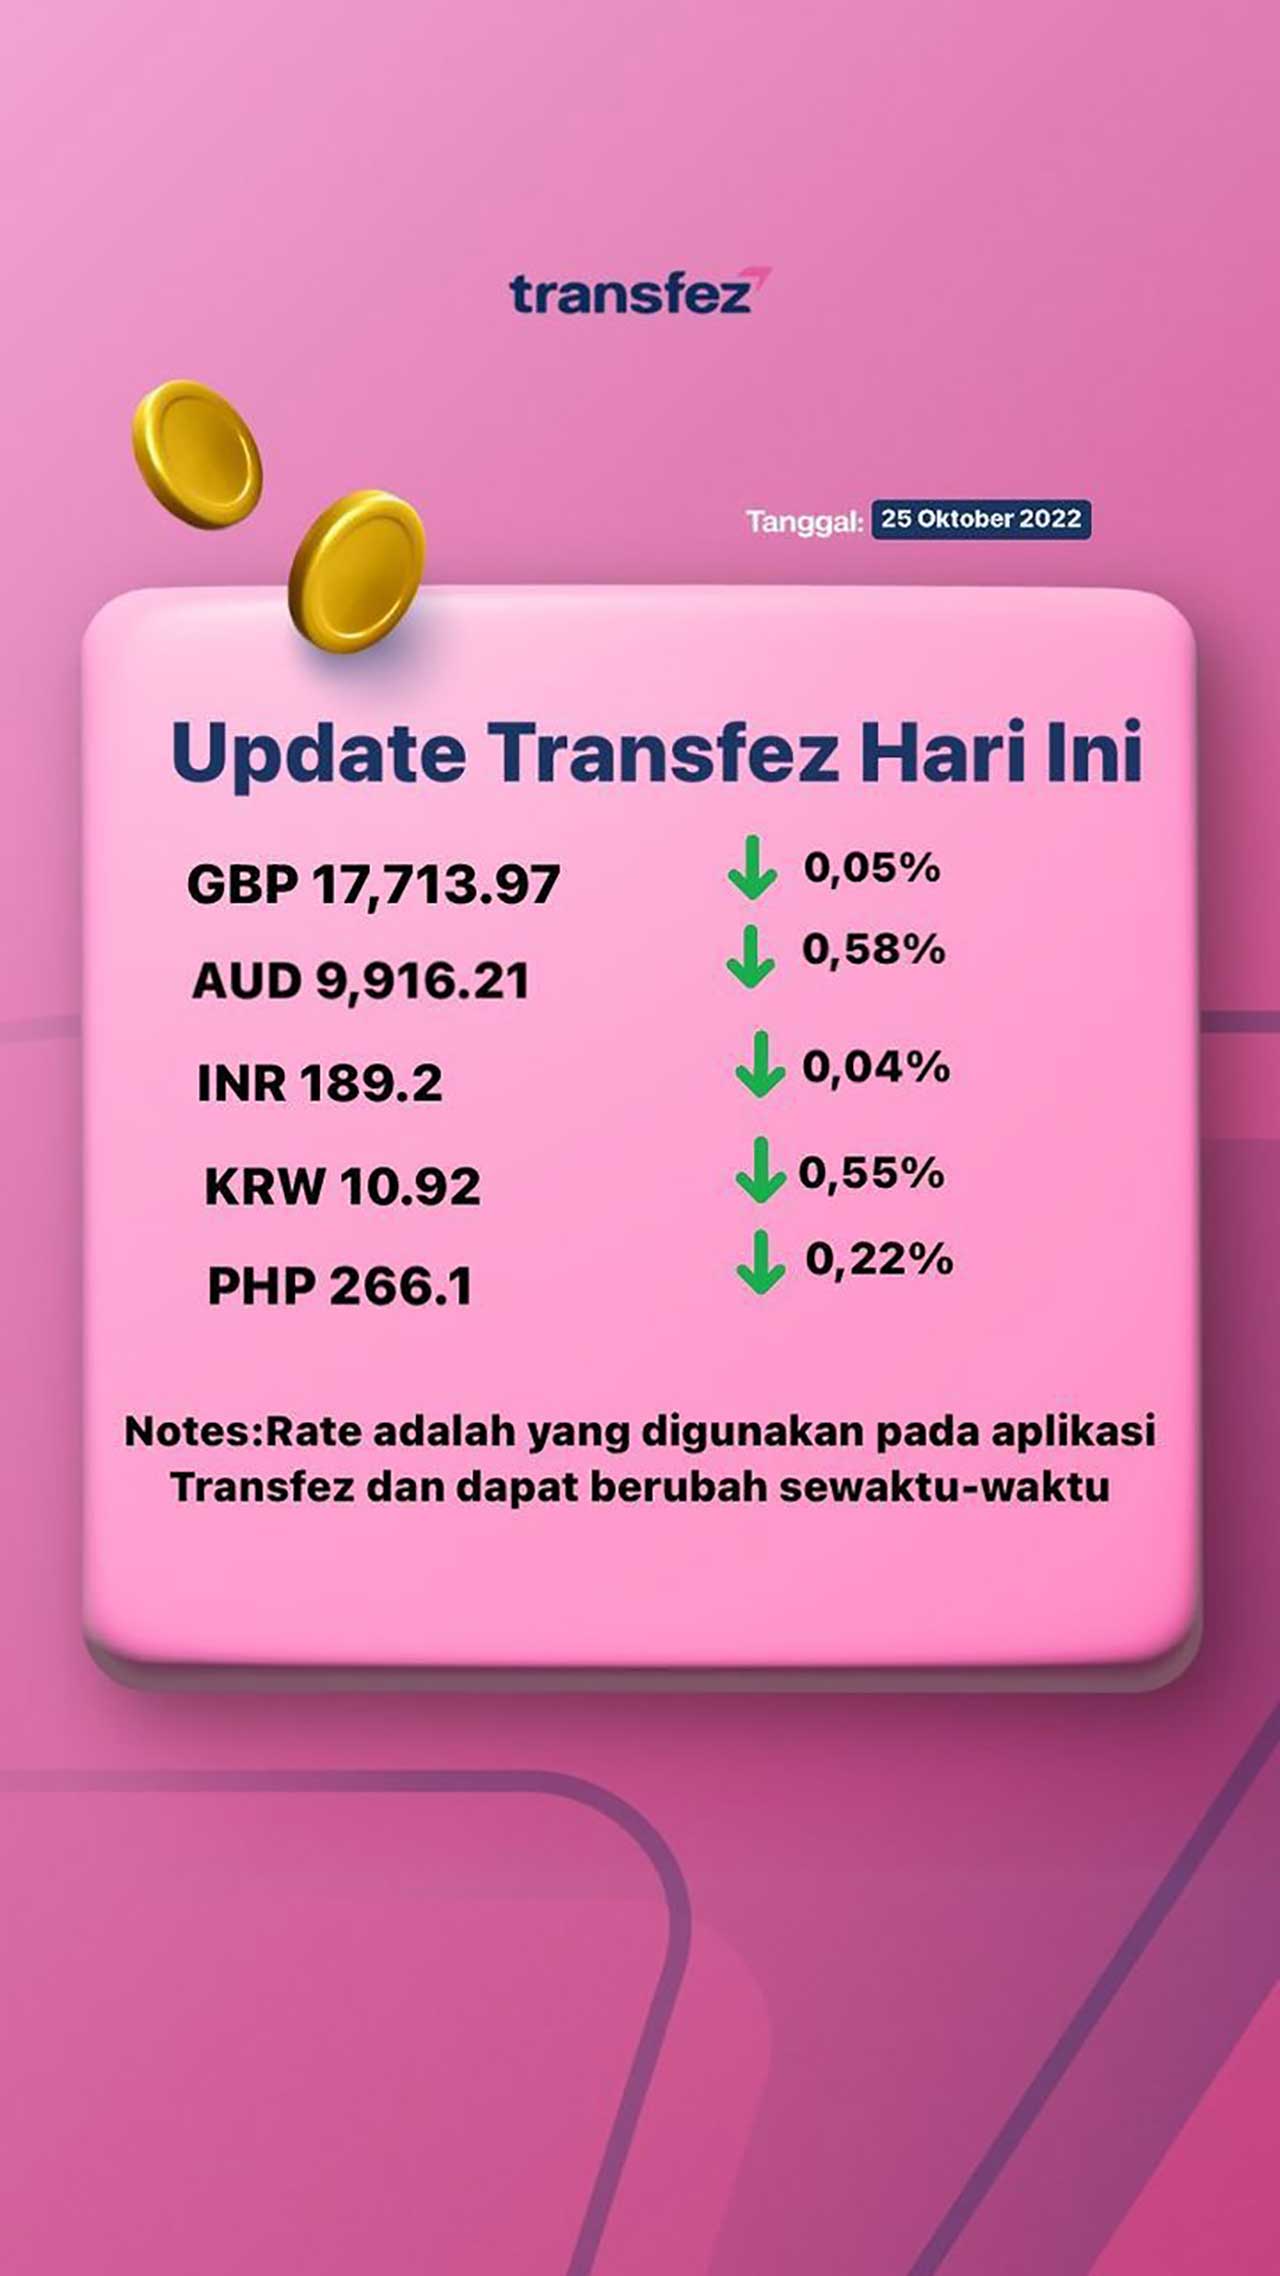 Today's Transfez Rate Update 25 October 2022